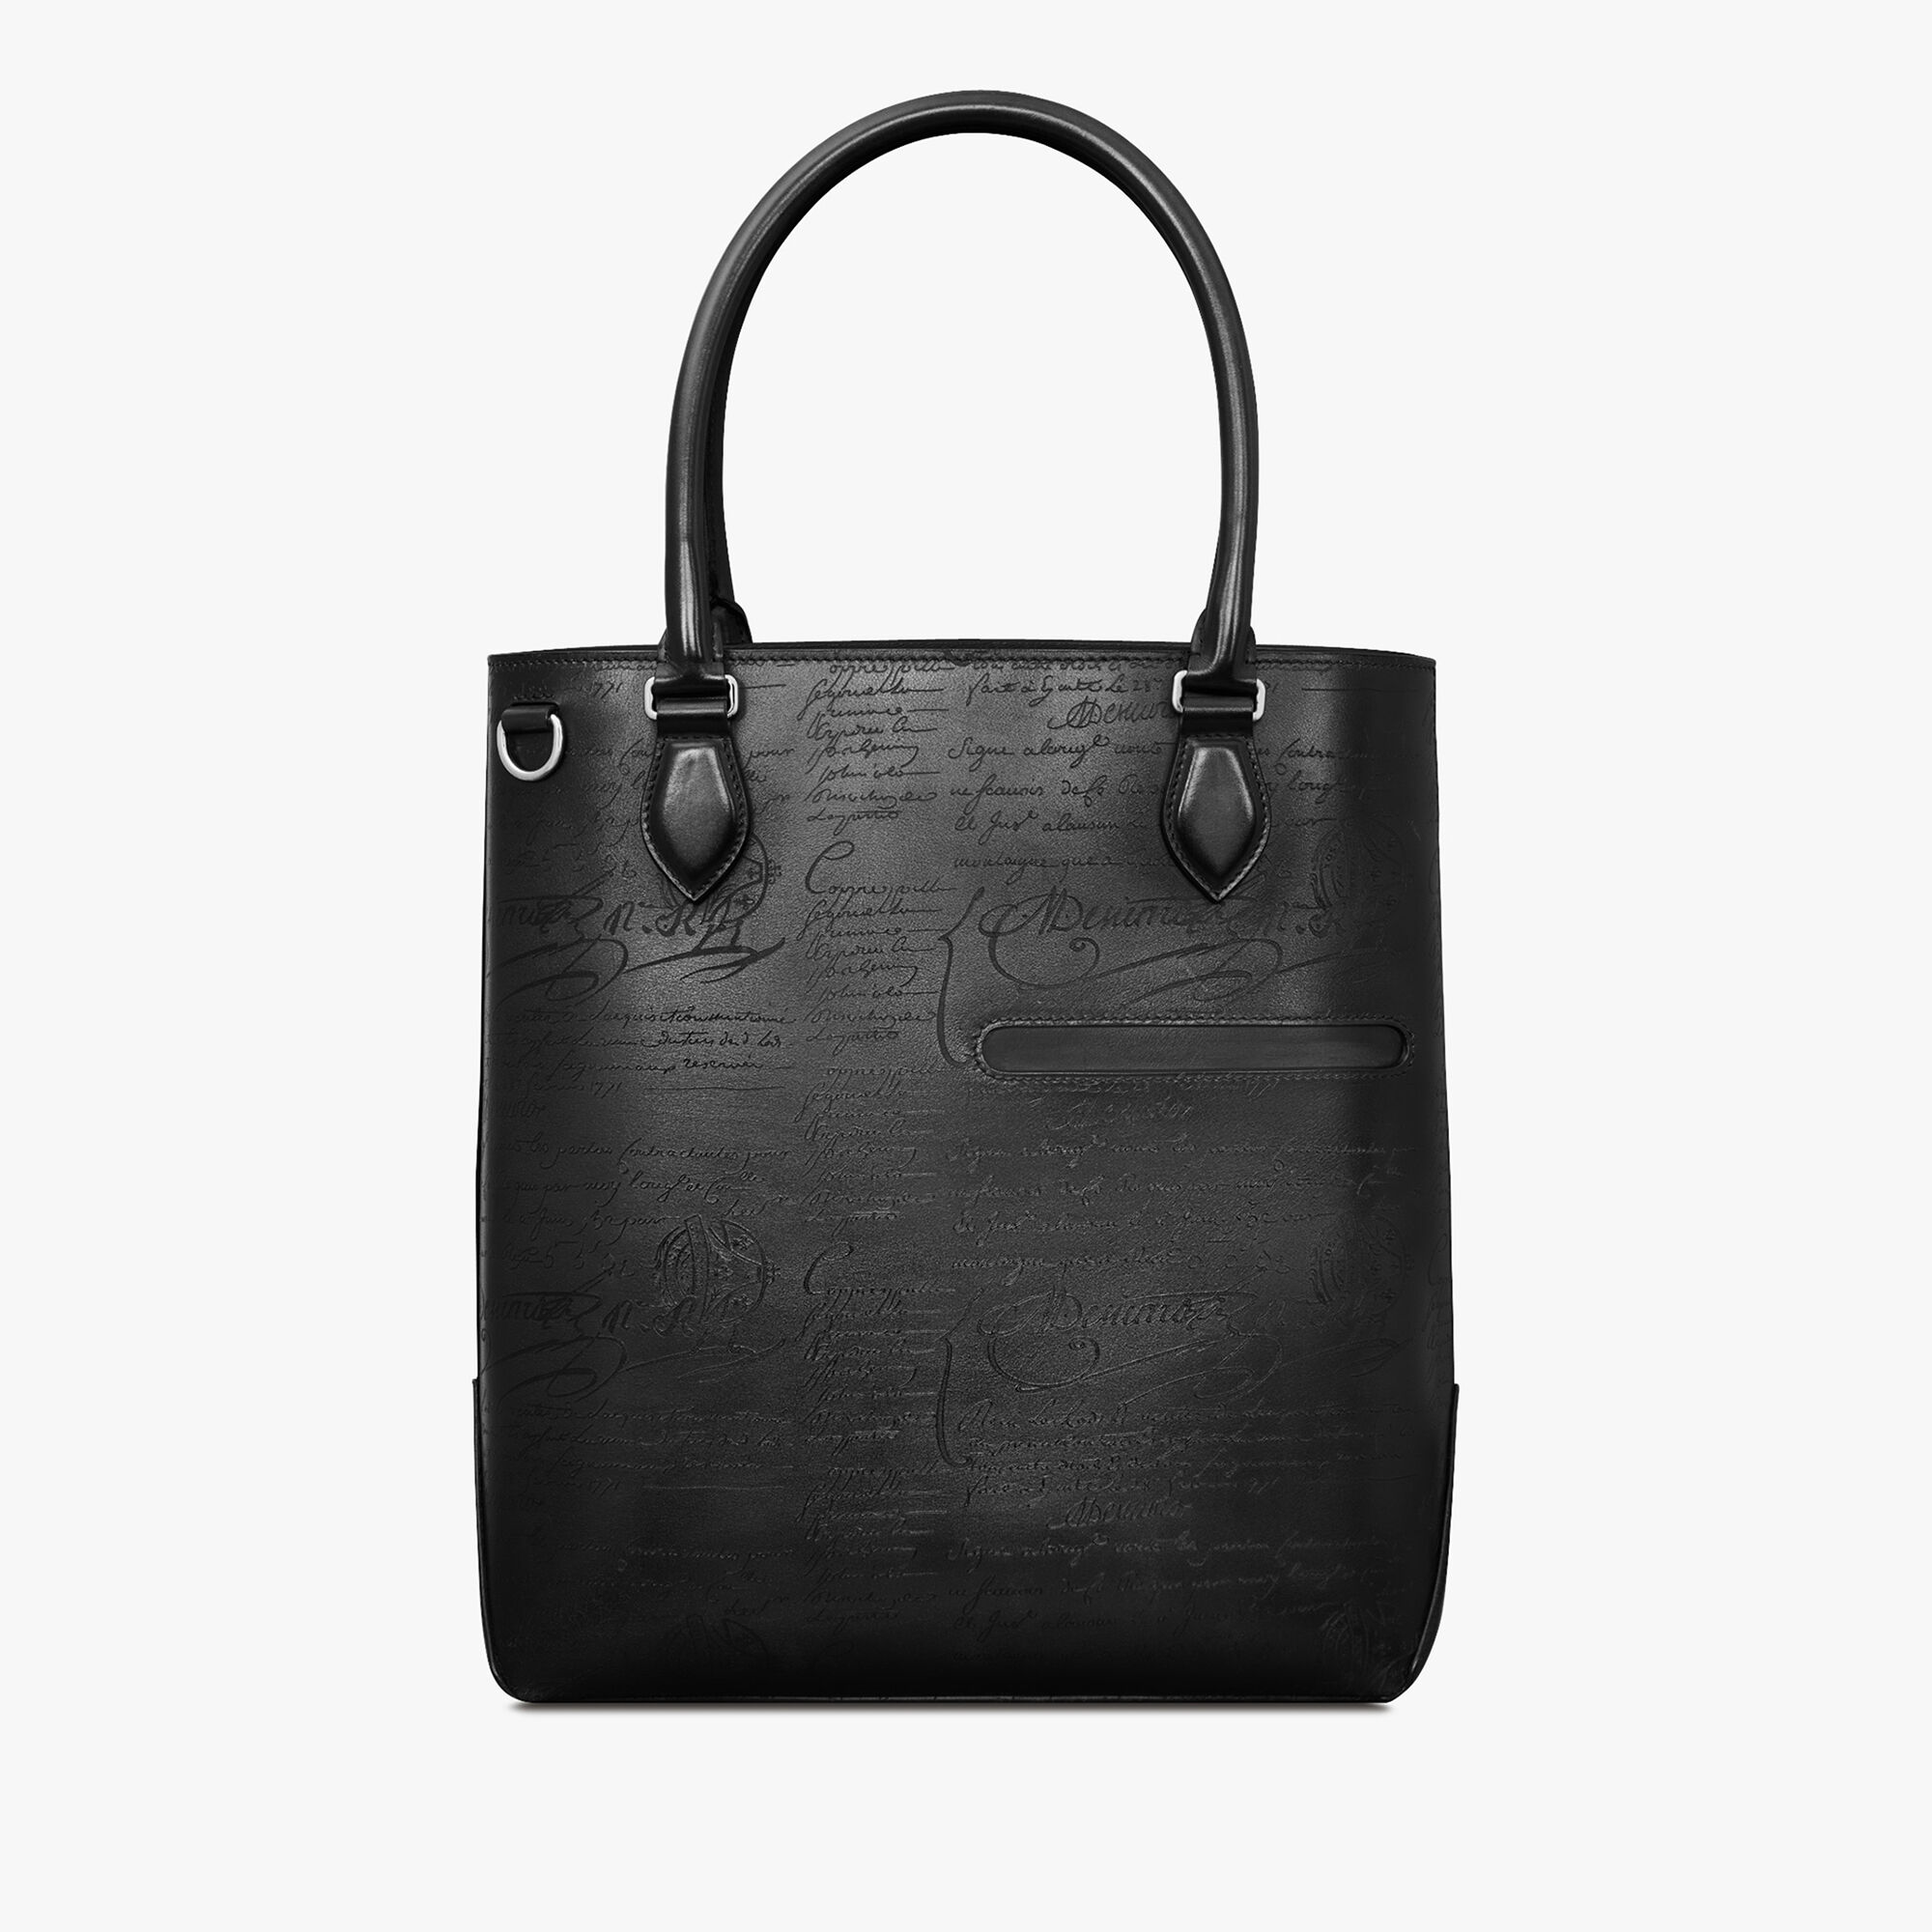 Tote bag collections by Berluti